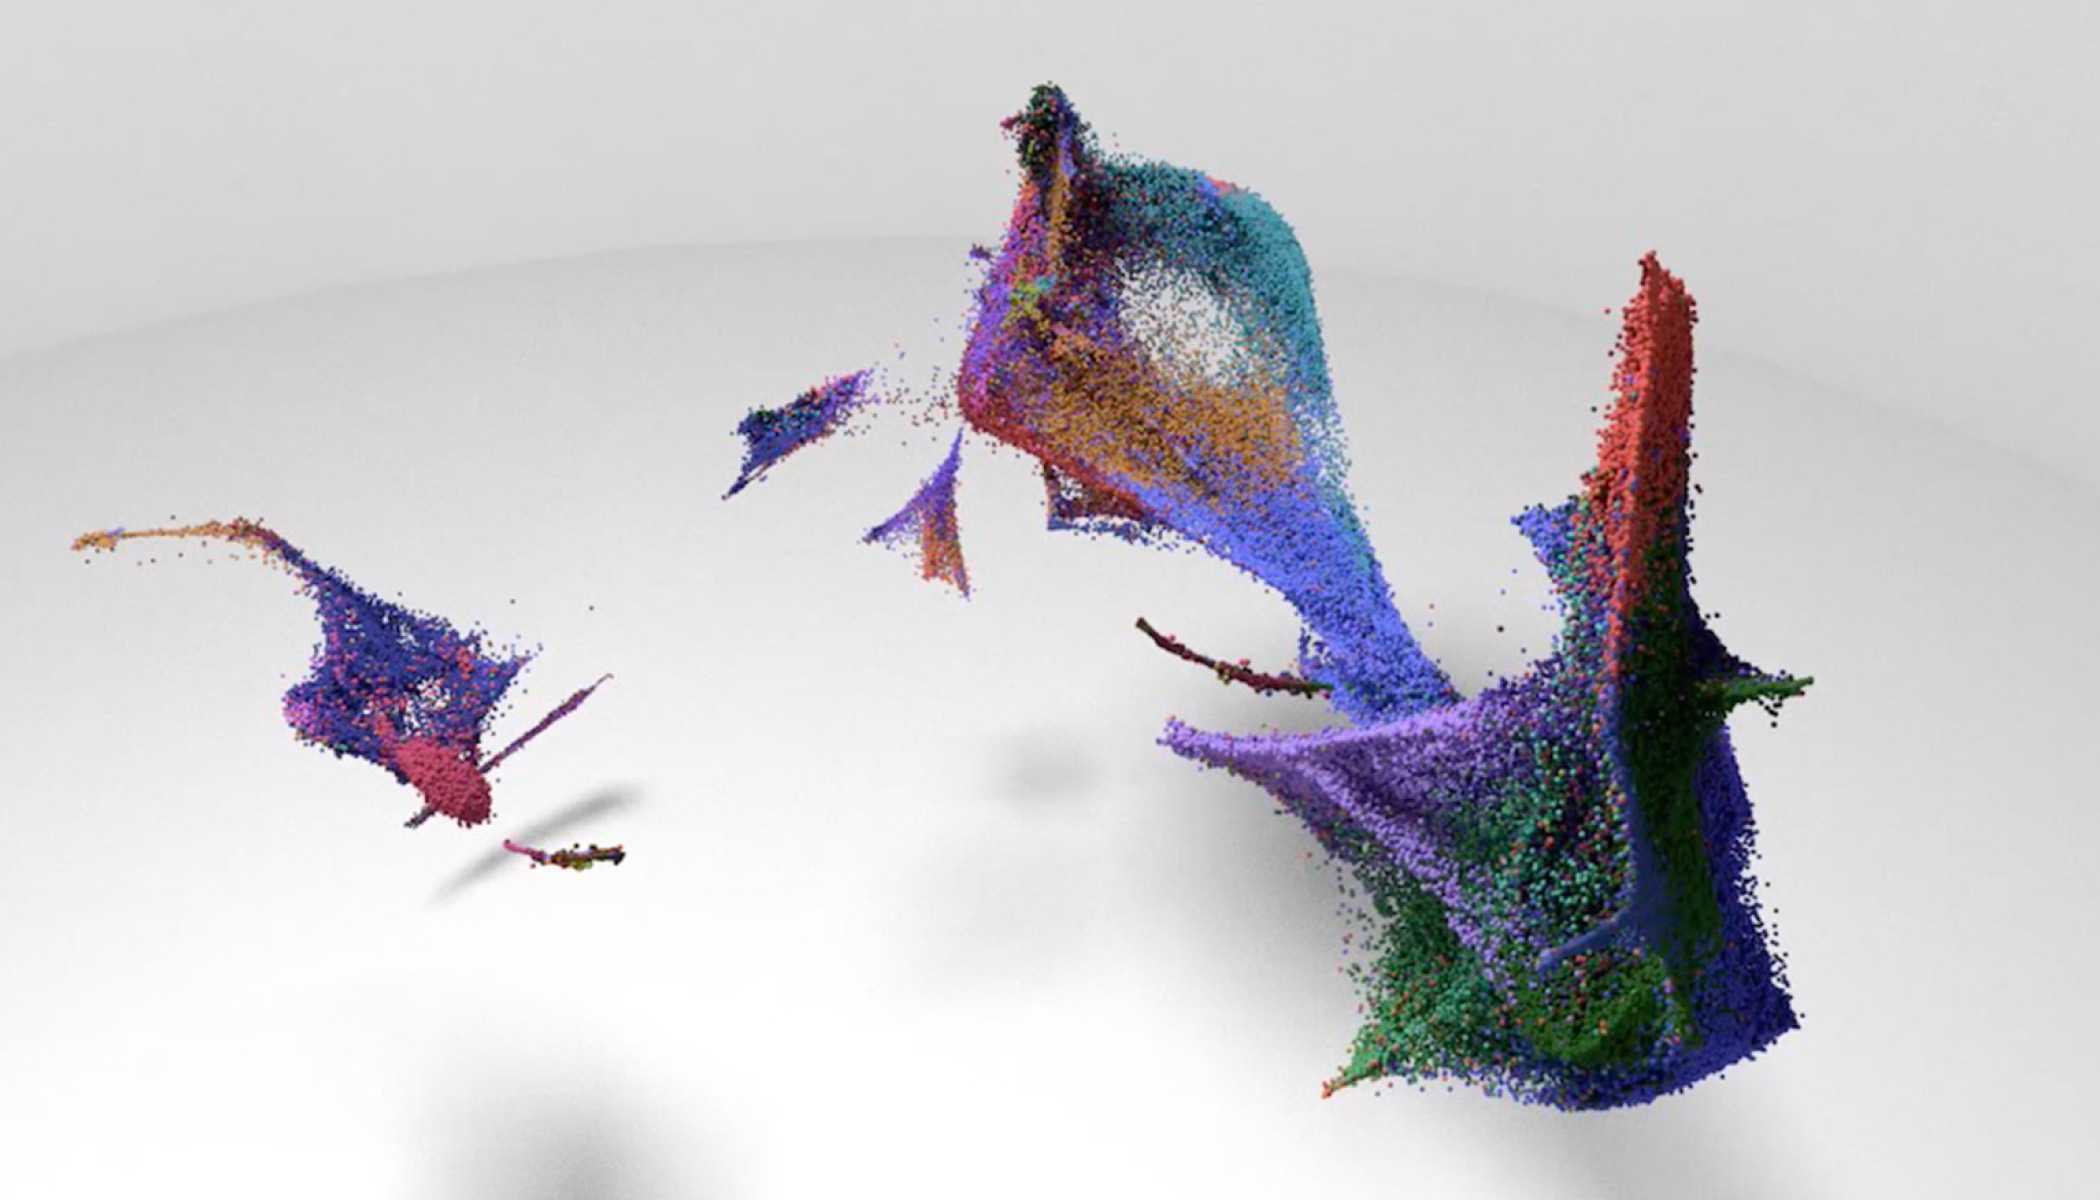 Data visualization shows a 3D abstraction of single cells from the early development of the mouse central nervous system.